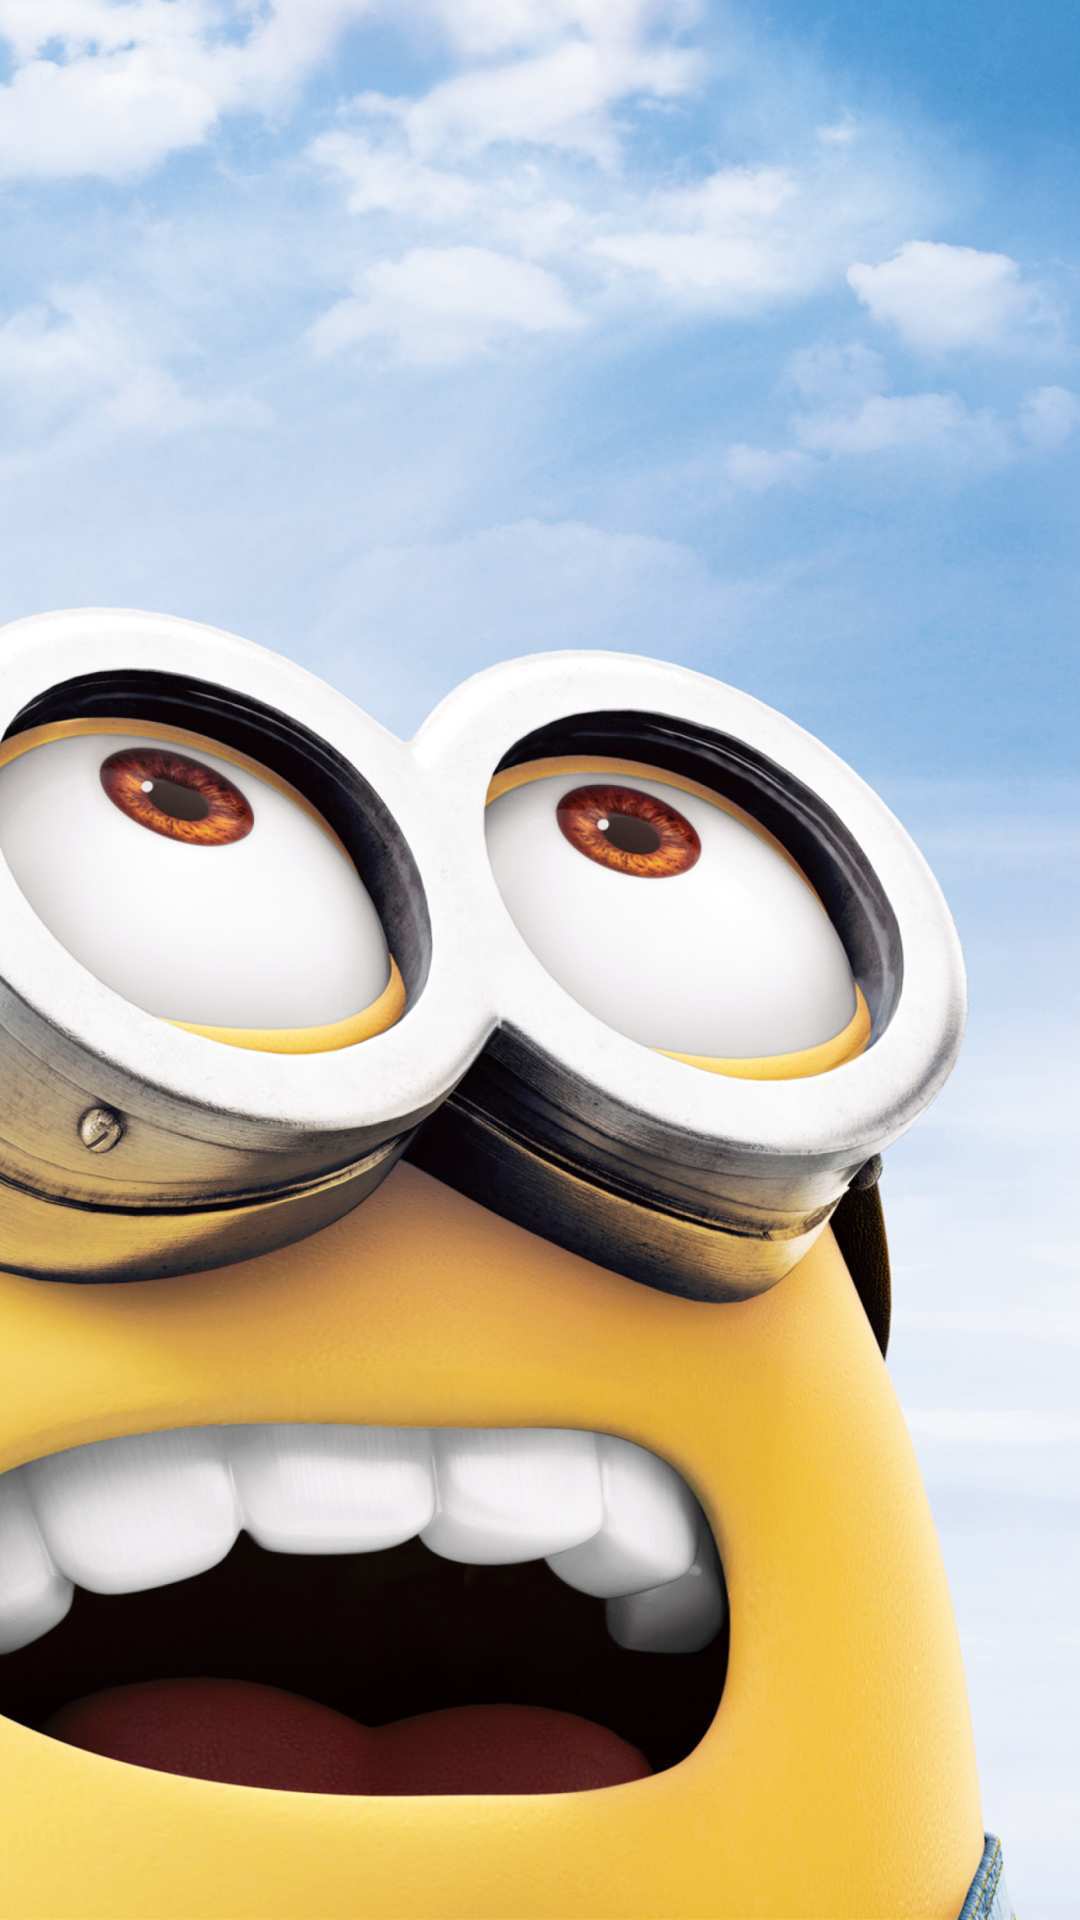 Minions Hd Wallpapers For Iphone 6 - Minions Wallpaper Iphone Hd -  1080x1920 Wallpaper 